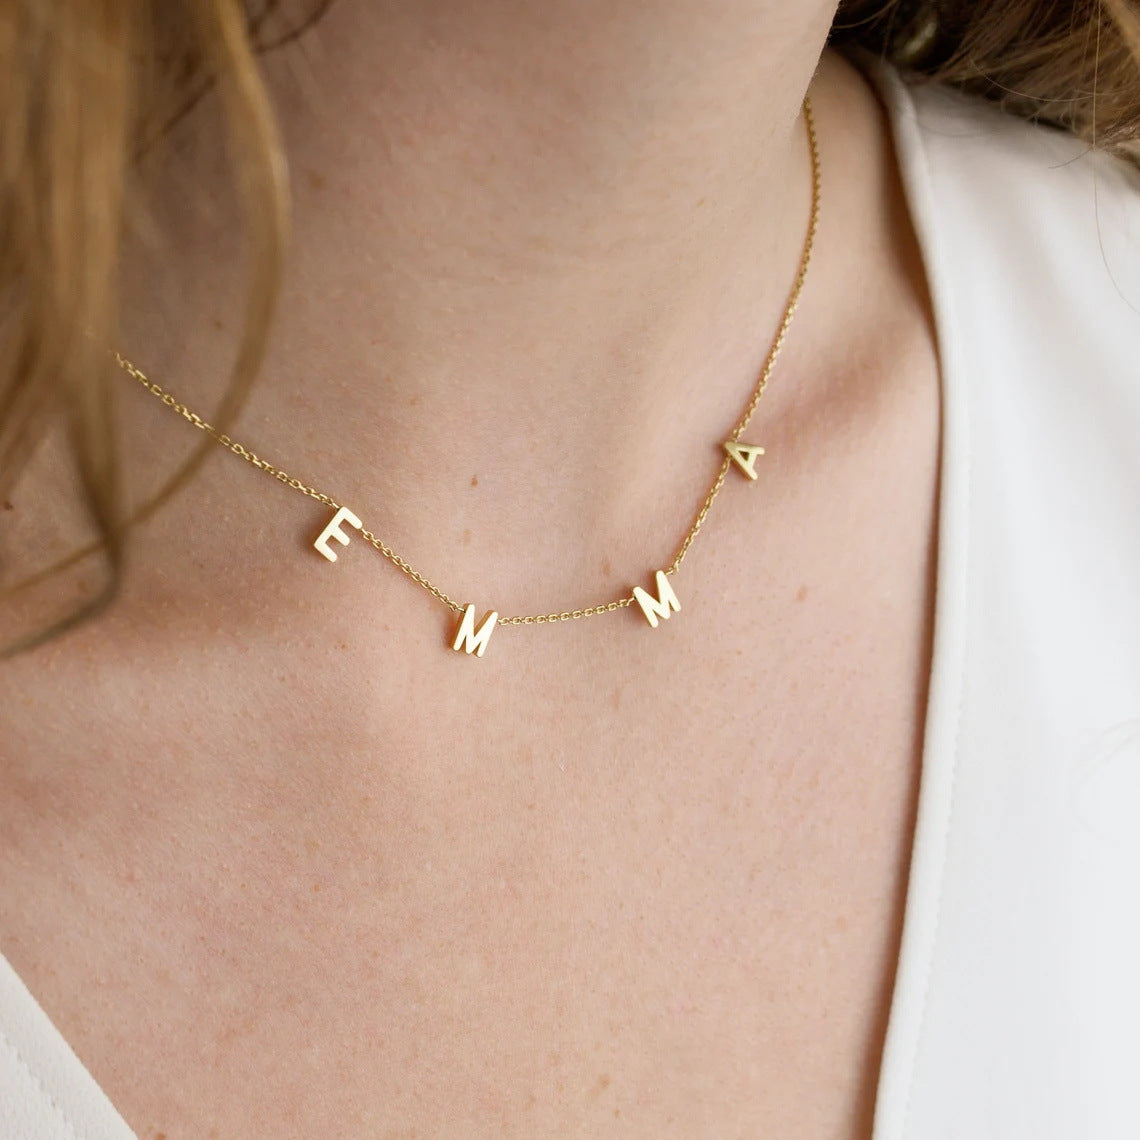 A woman wearing Amara letter necklace in gold with initials E M M A.